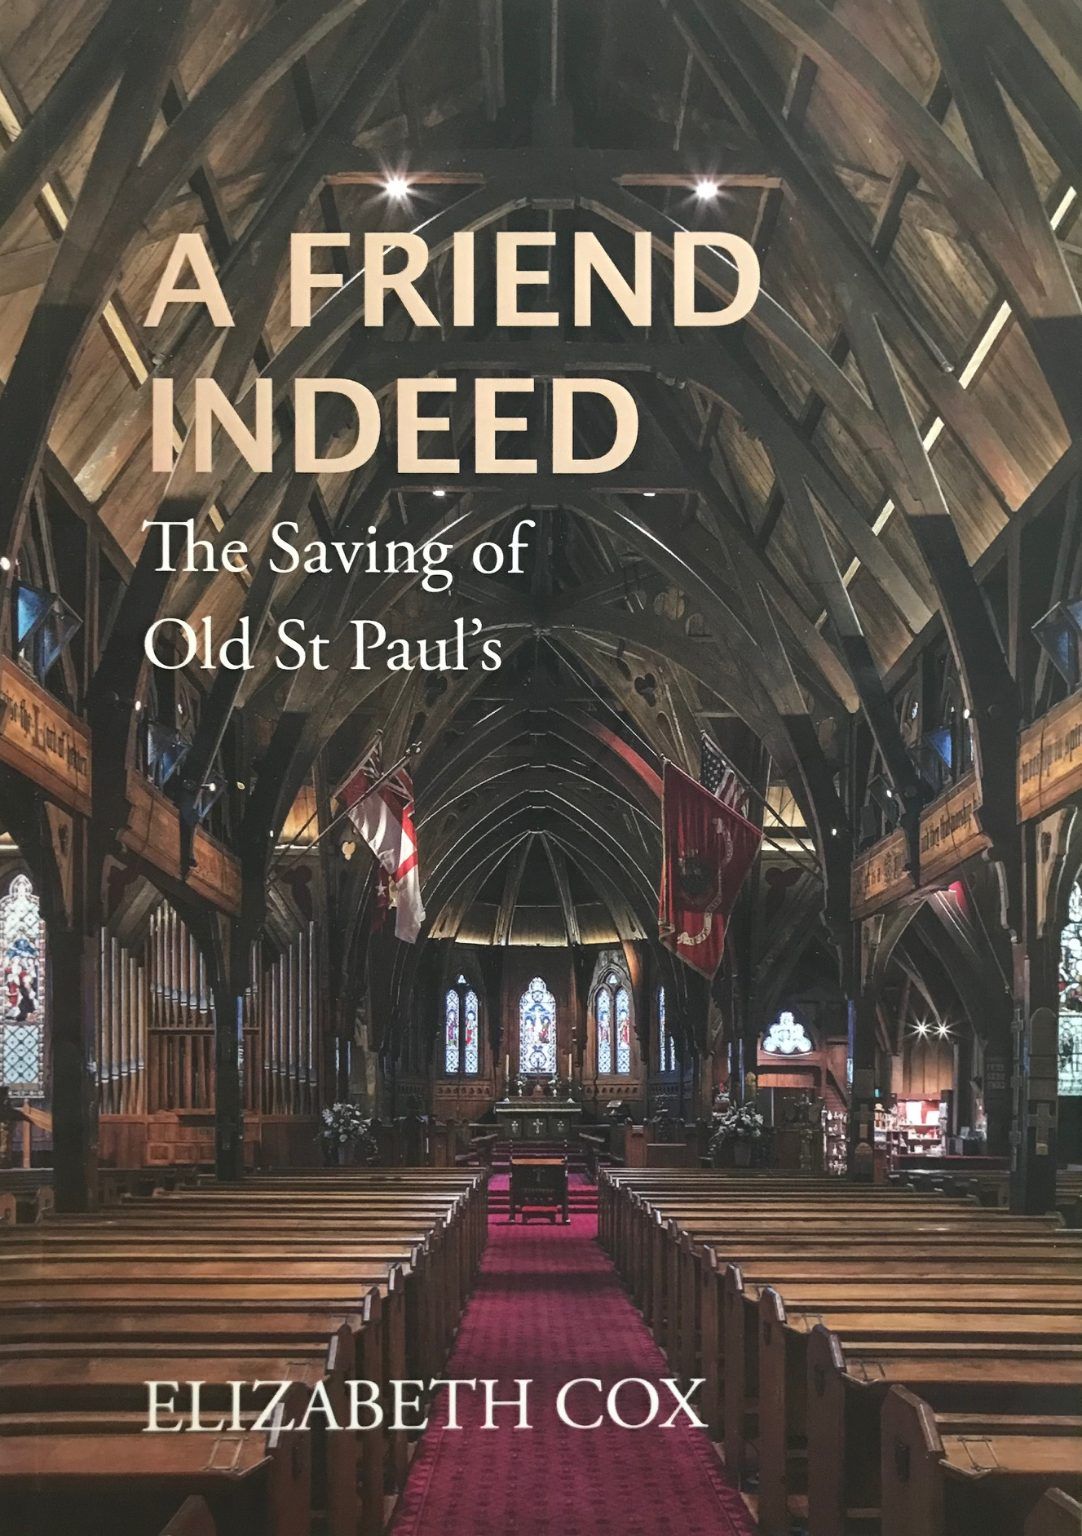 A FRIEND INDEED: The Saving of Old St Paul's